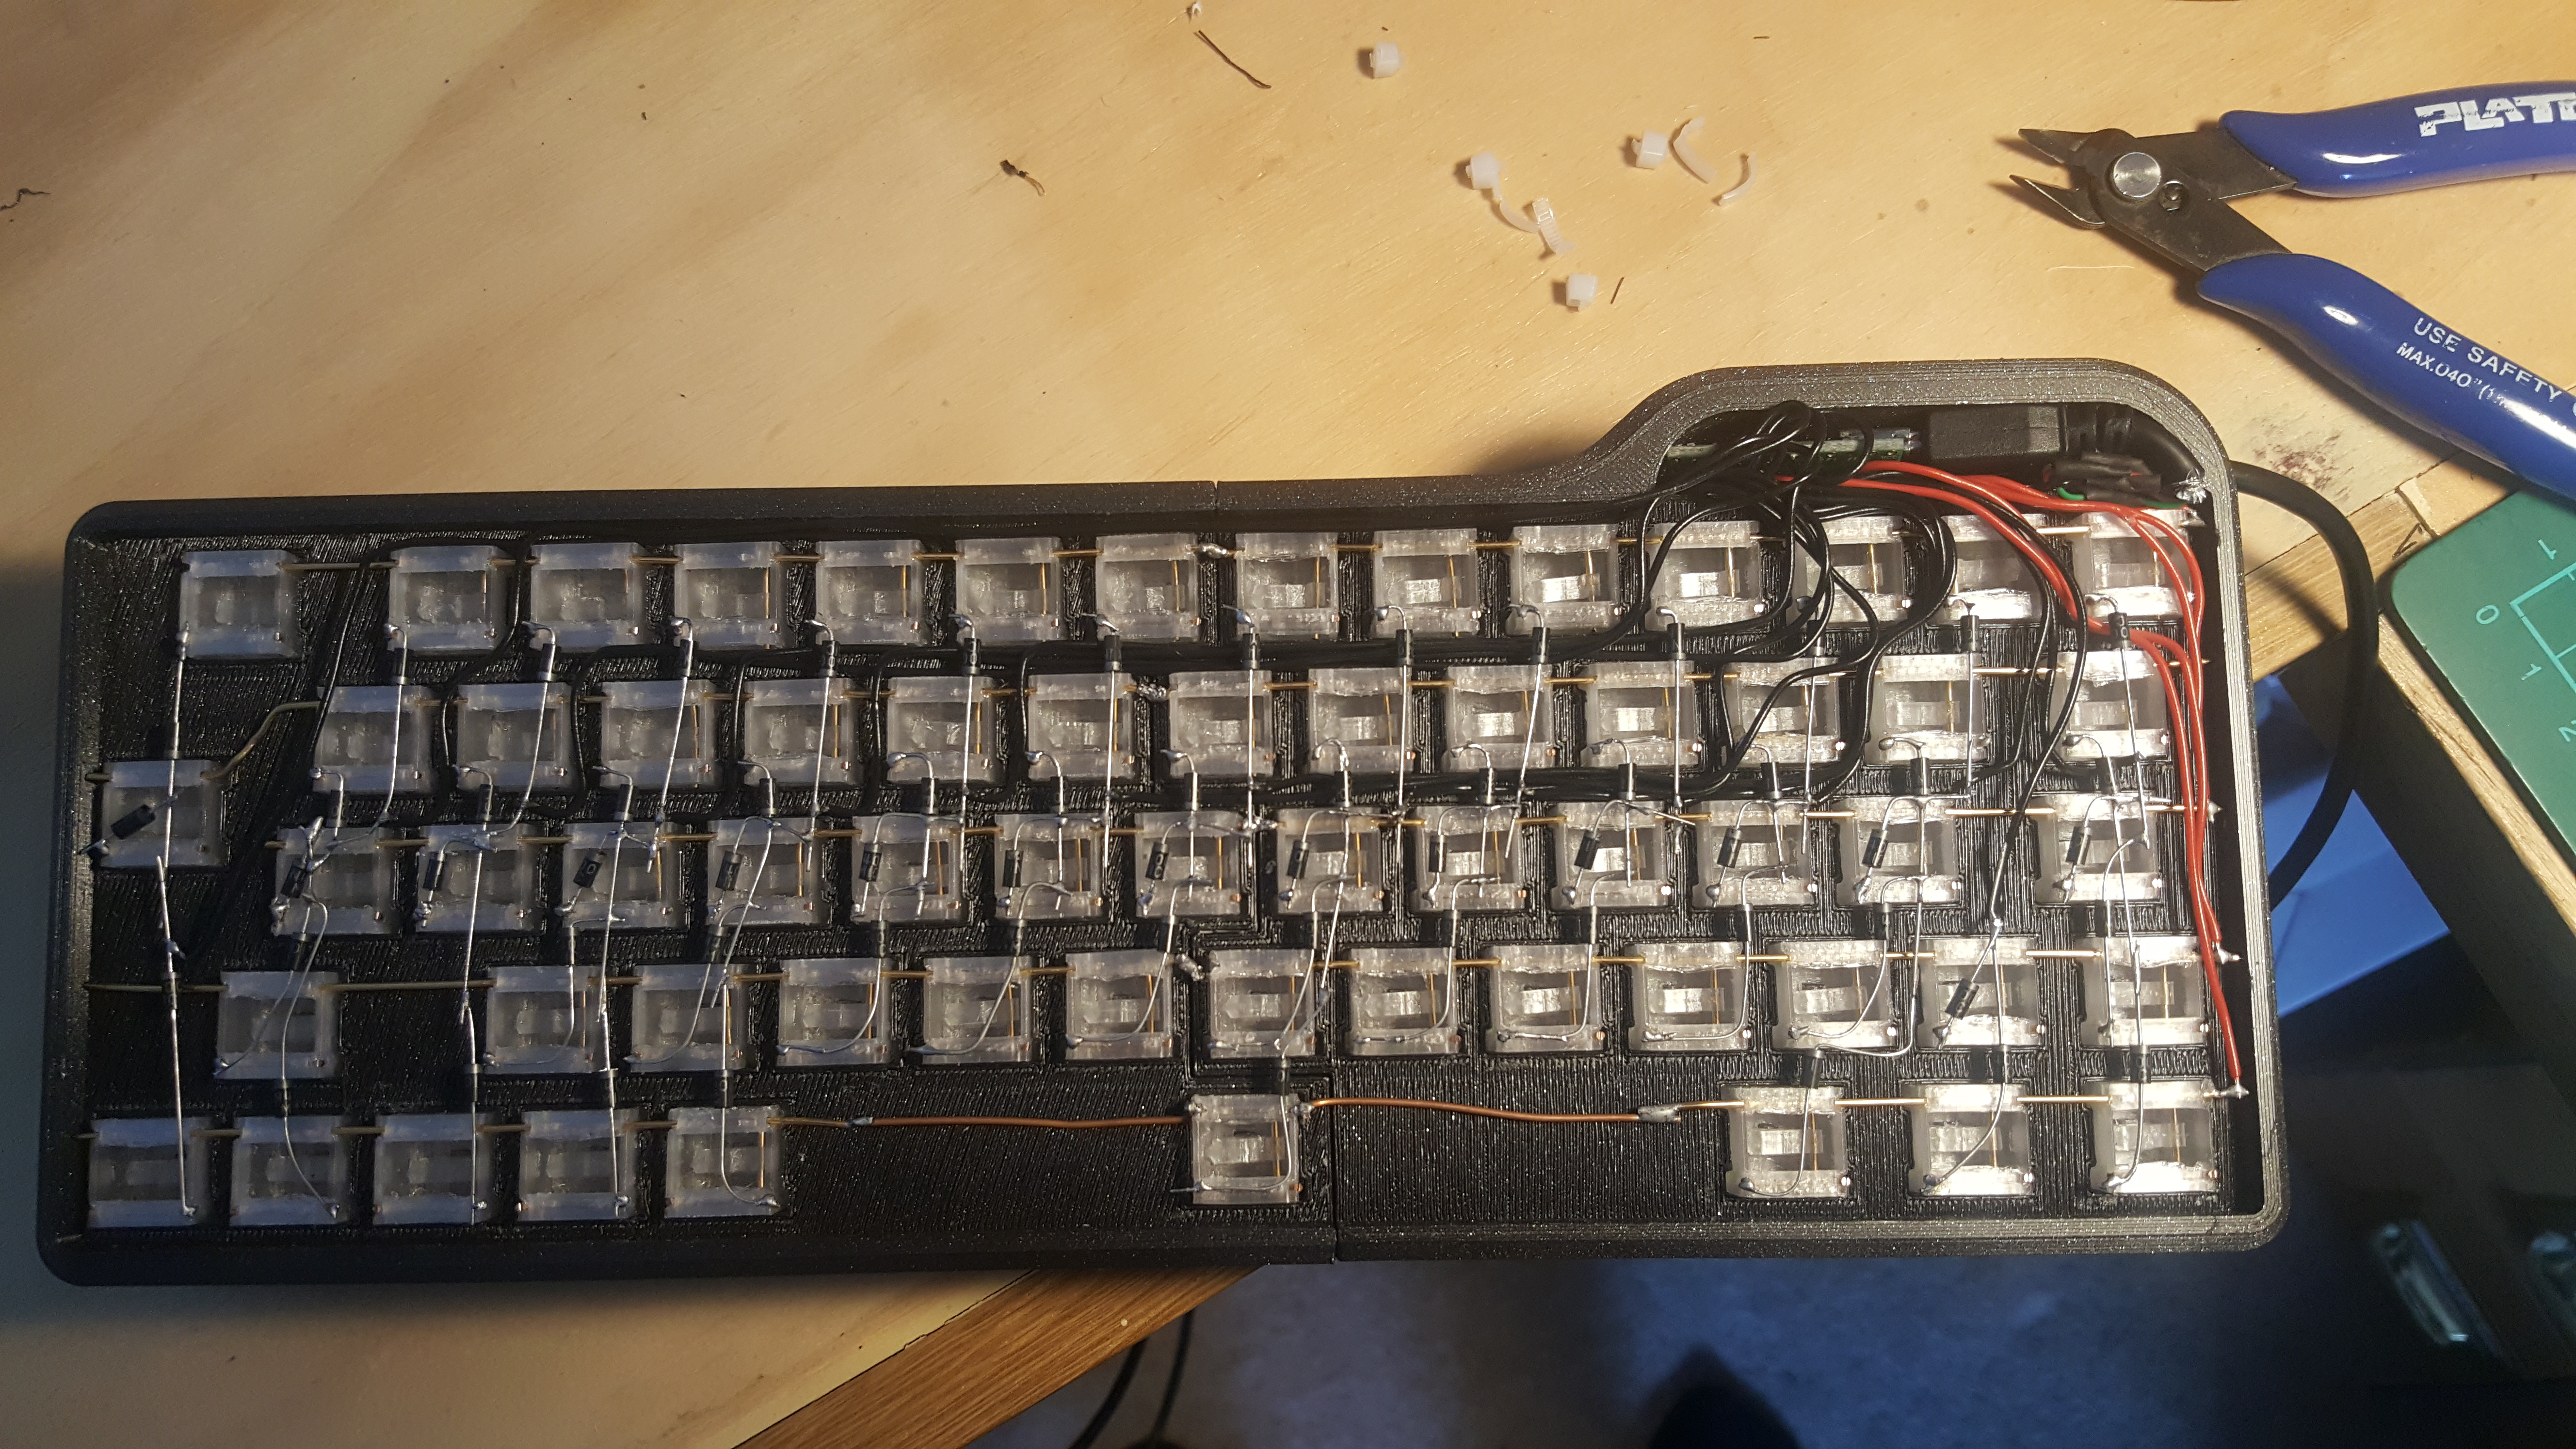 James Stanley I made a mechanical keyboard with 3d-printed switches